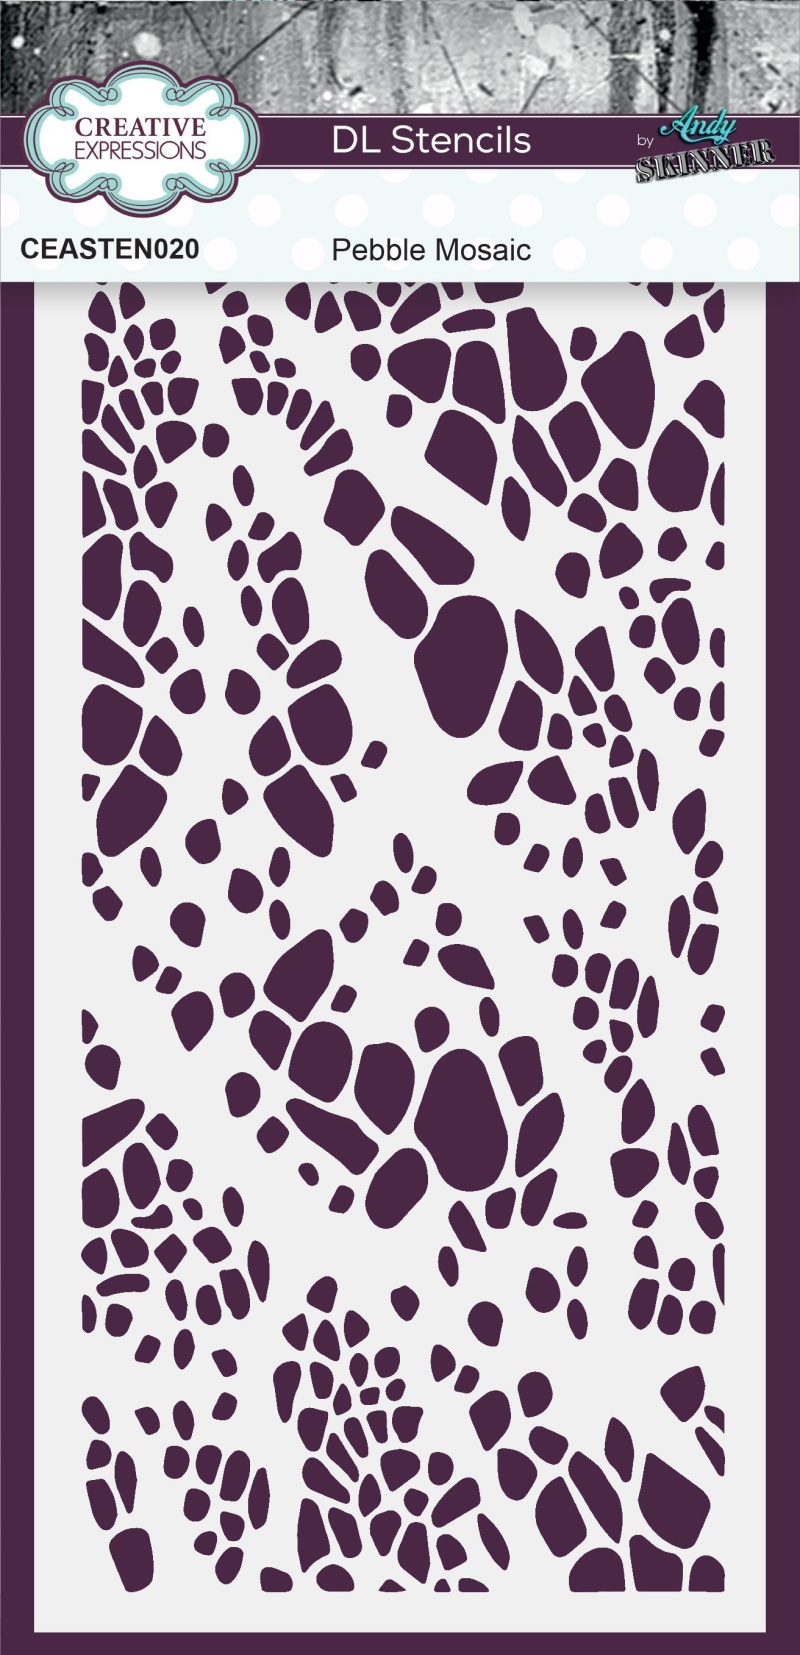 Creative Expressions Andy Skinner Pebble Mosaic Dl Stencil